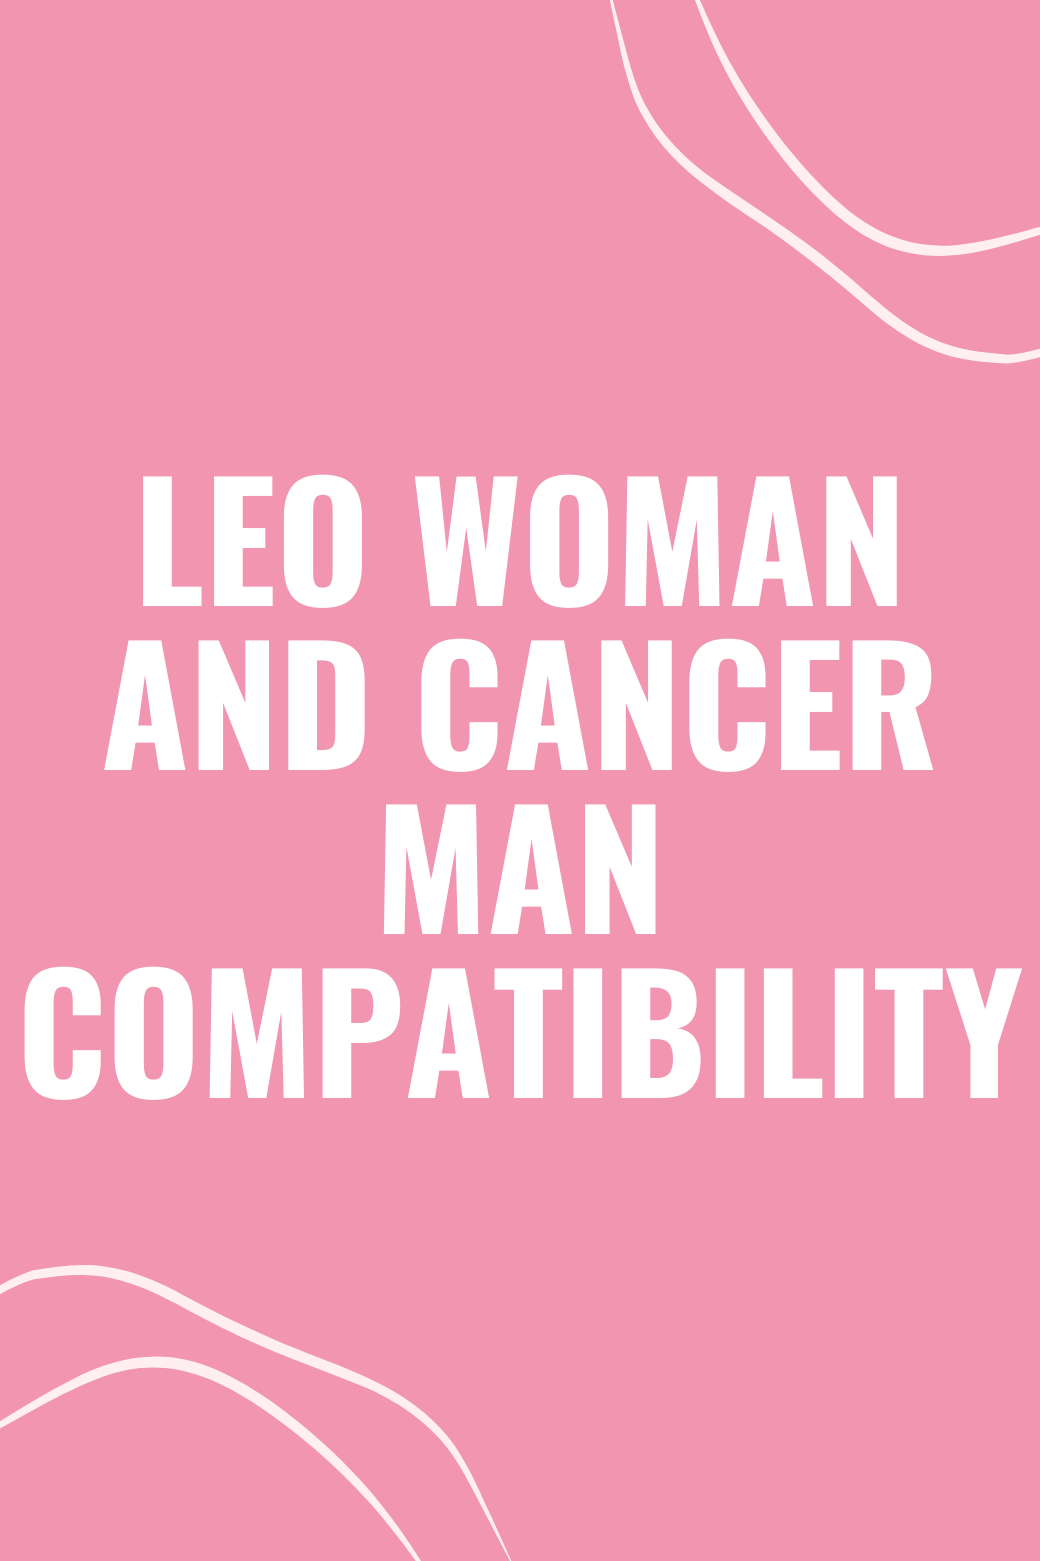 Leo Woman and Cancer Man Compatibility